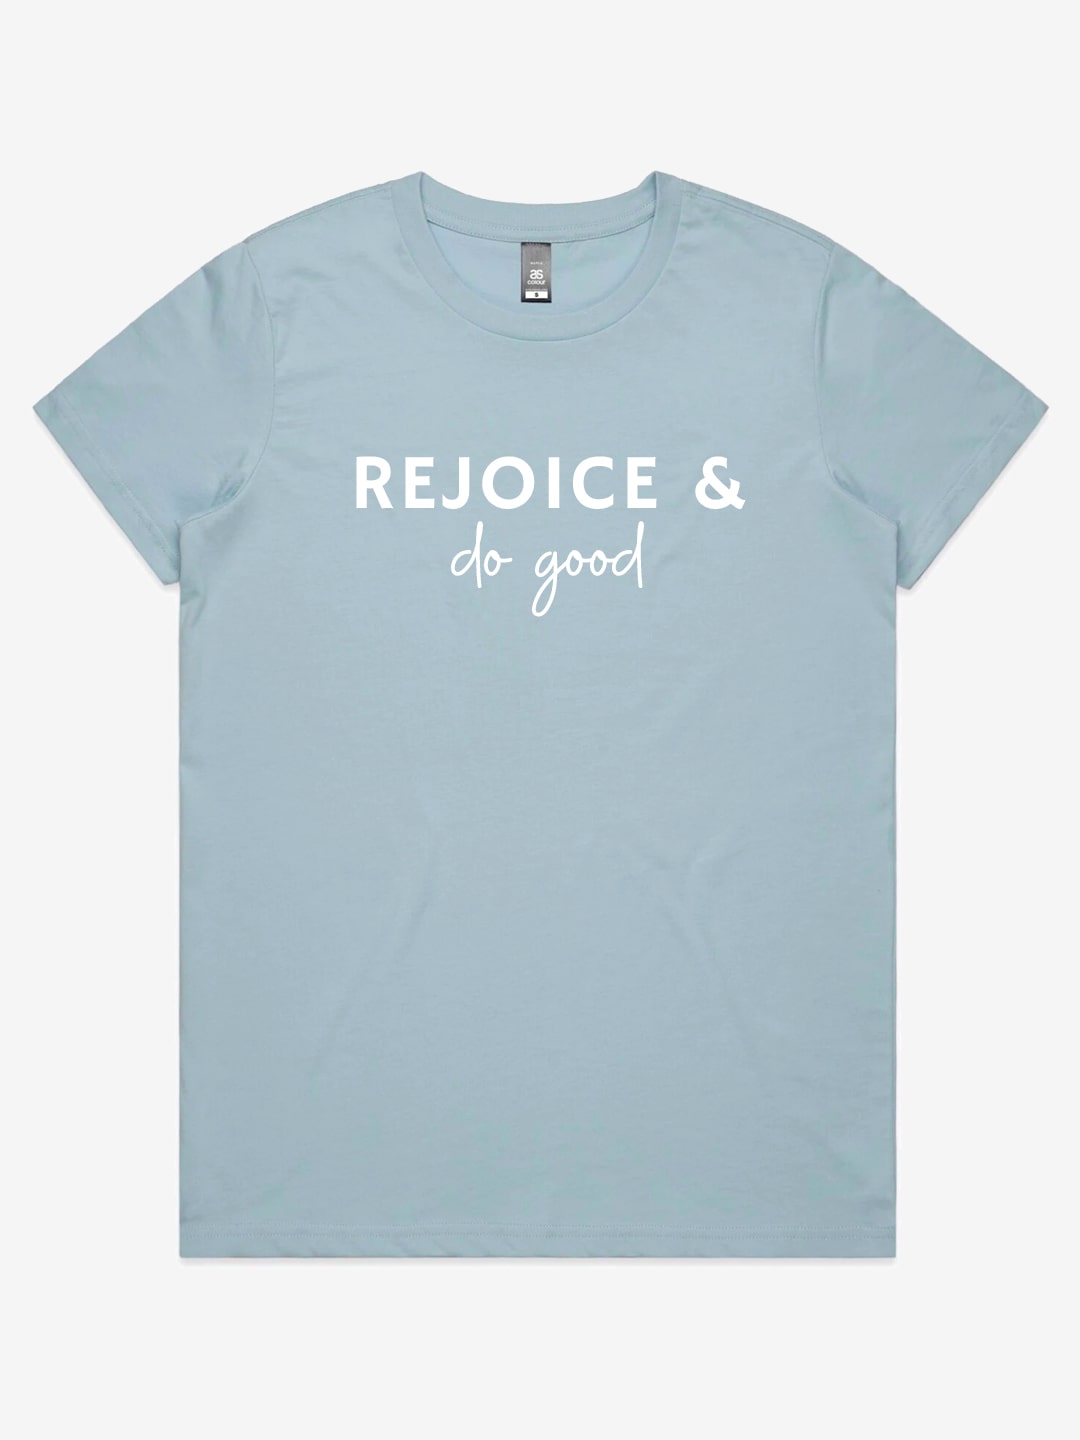 Rejoice & Do Good Christian Apparel - Women's Blue T-shirt Tee with the words Rejoice & Do Good on it from Ecclesiastes 3:12